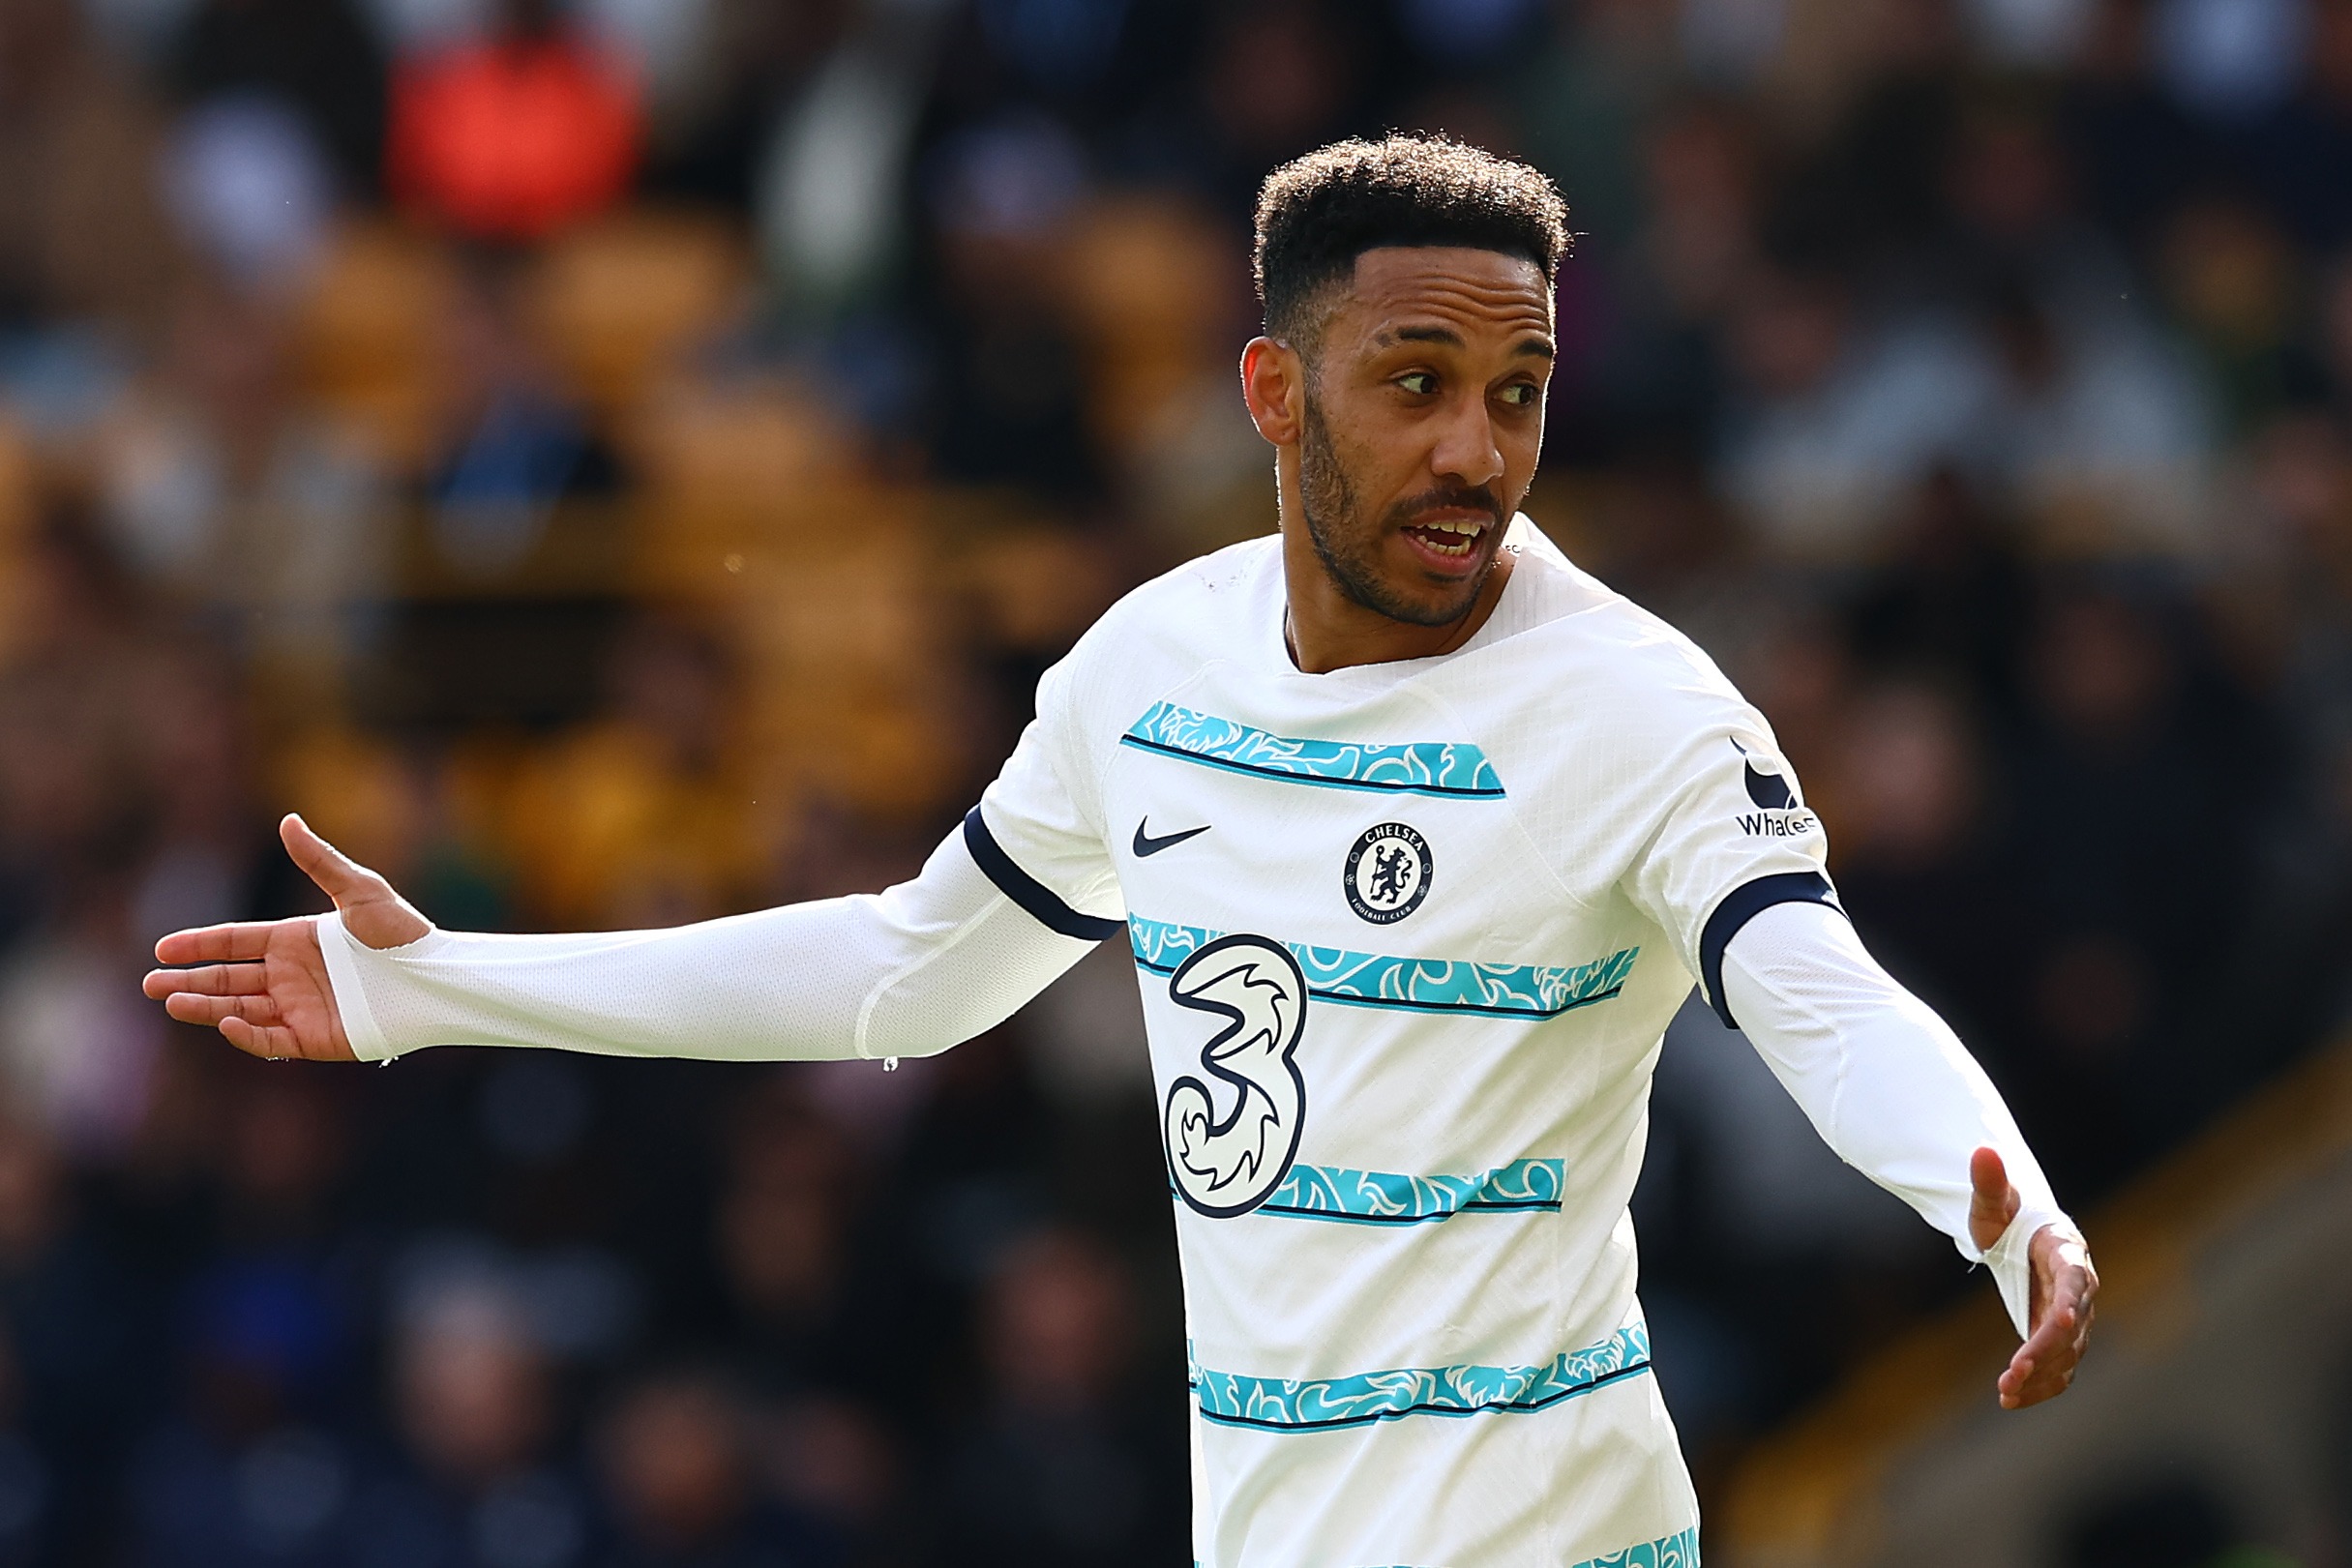 WOLVERHAMPTON, ENGLAND - APRIL 08: Pierre-Emerick Aubameyang of Chelsea looks on during the Premier League match between Wolverhampton Wanderers and Chelsea FC at Molineux on April 08, 2023 in Wolverhampton, England. (Photo by Chris Brunskill/Fantasista/Getty Images)